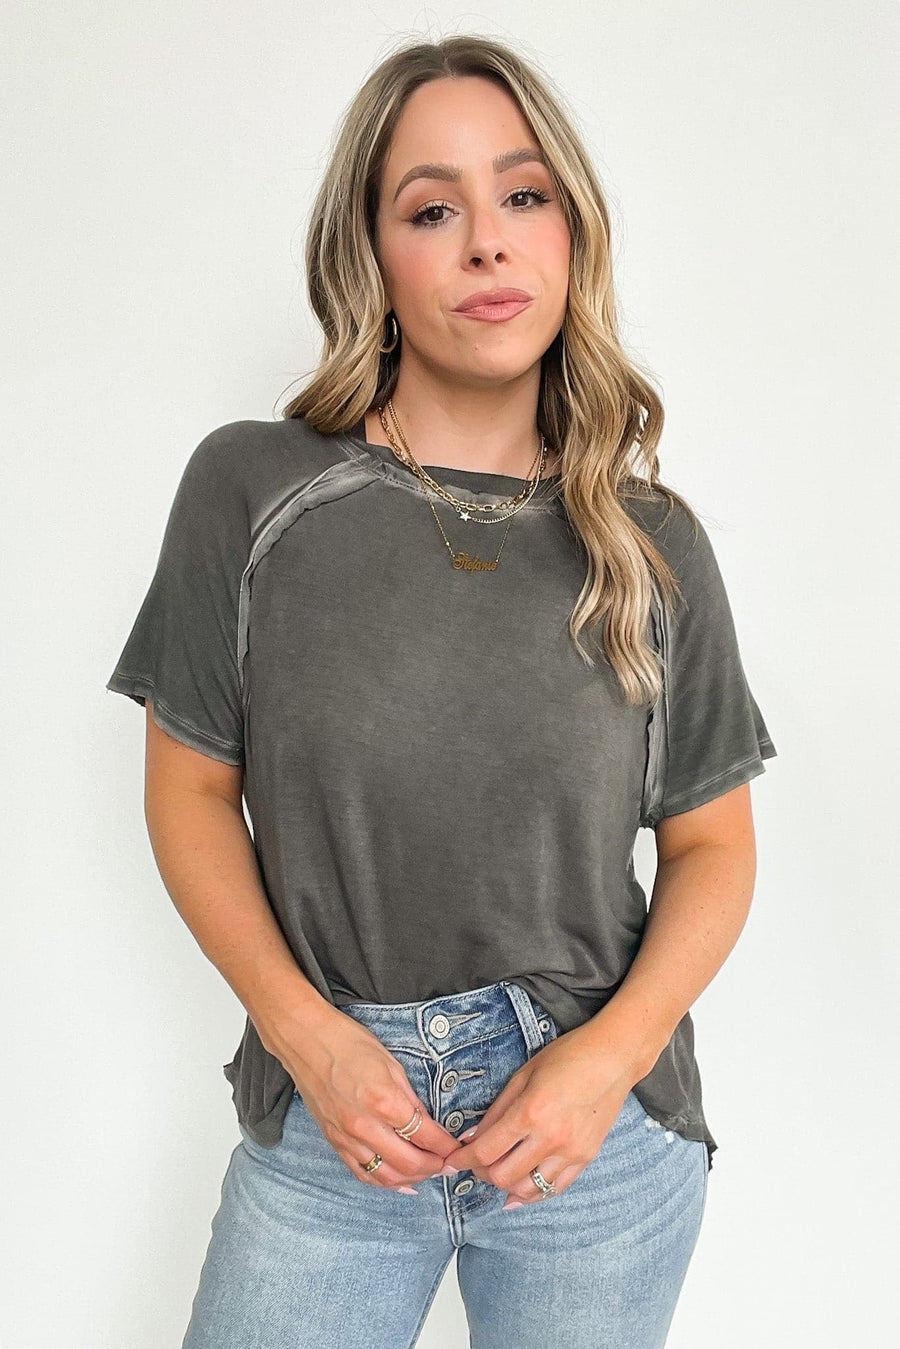  Alexi Mineral Washed Short Sleeve Relaxed Top - BACK IN STOCK - Madison and Mallory